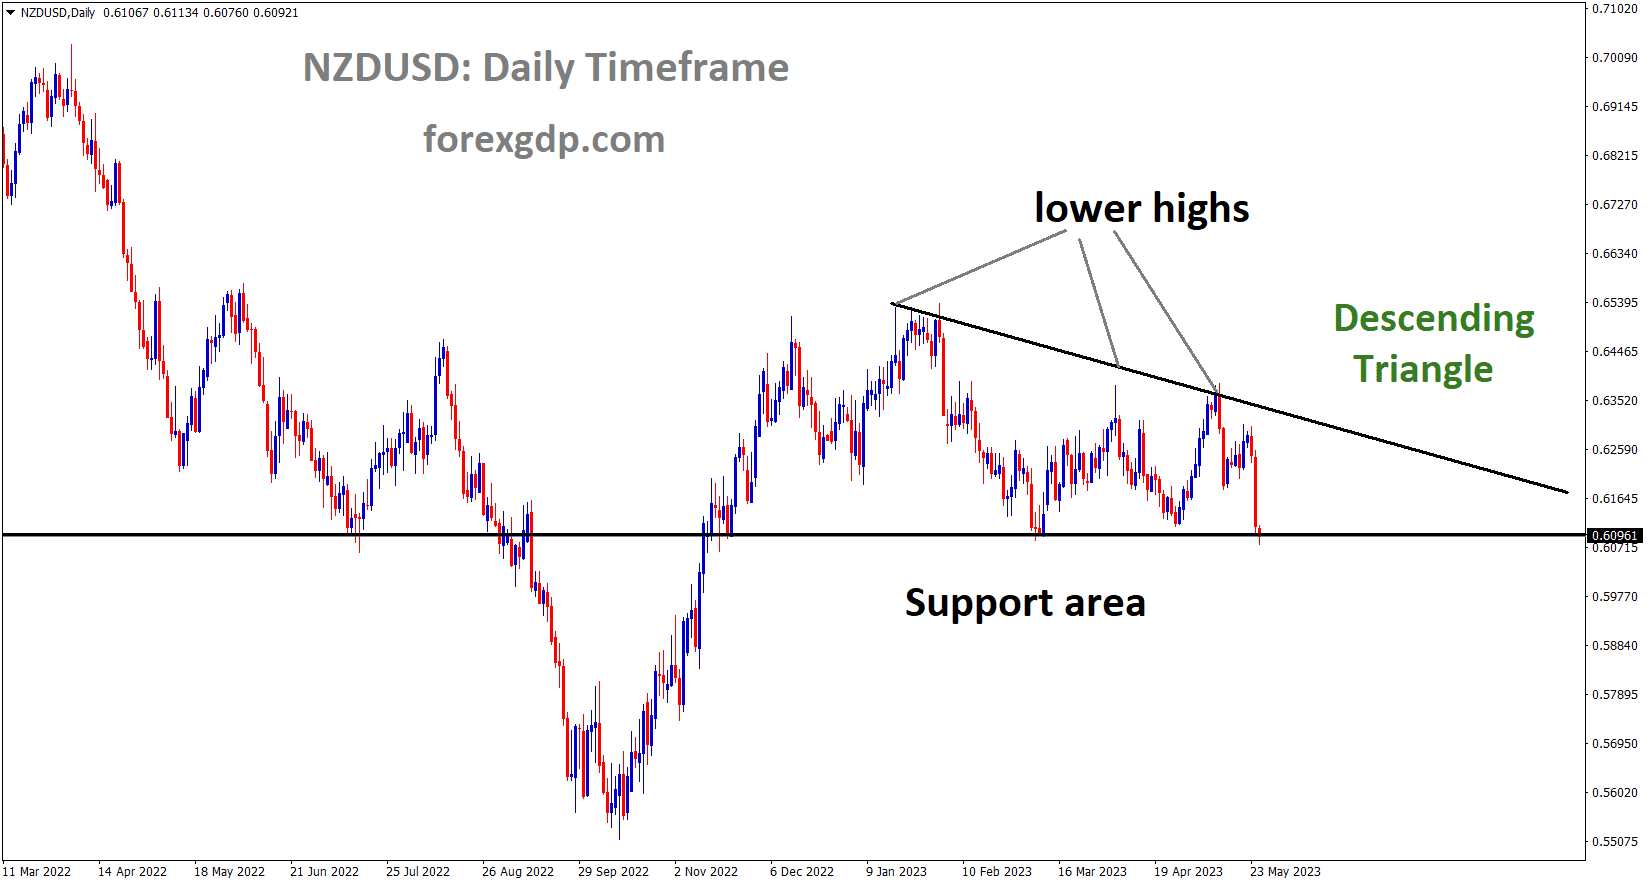 NZDUSD is moving in the Descending triangle pattern and the market has reached the horizontal support area of the pattern